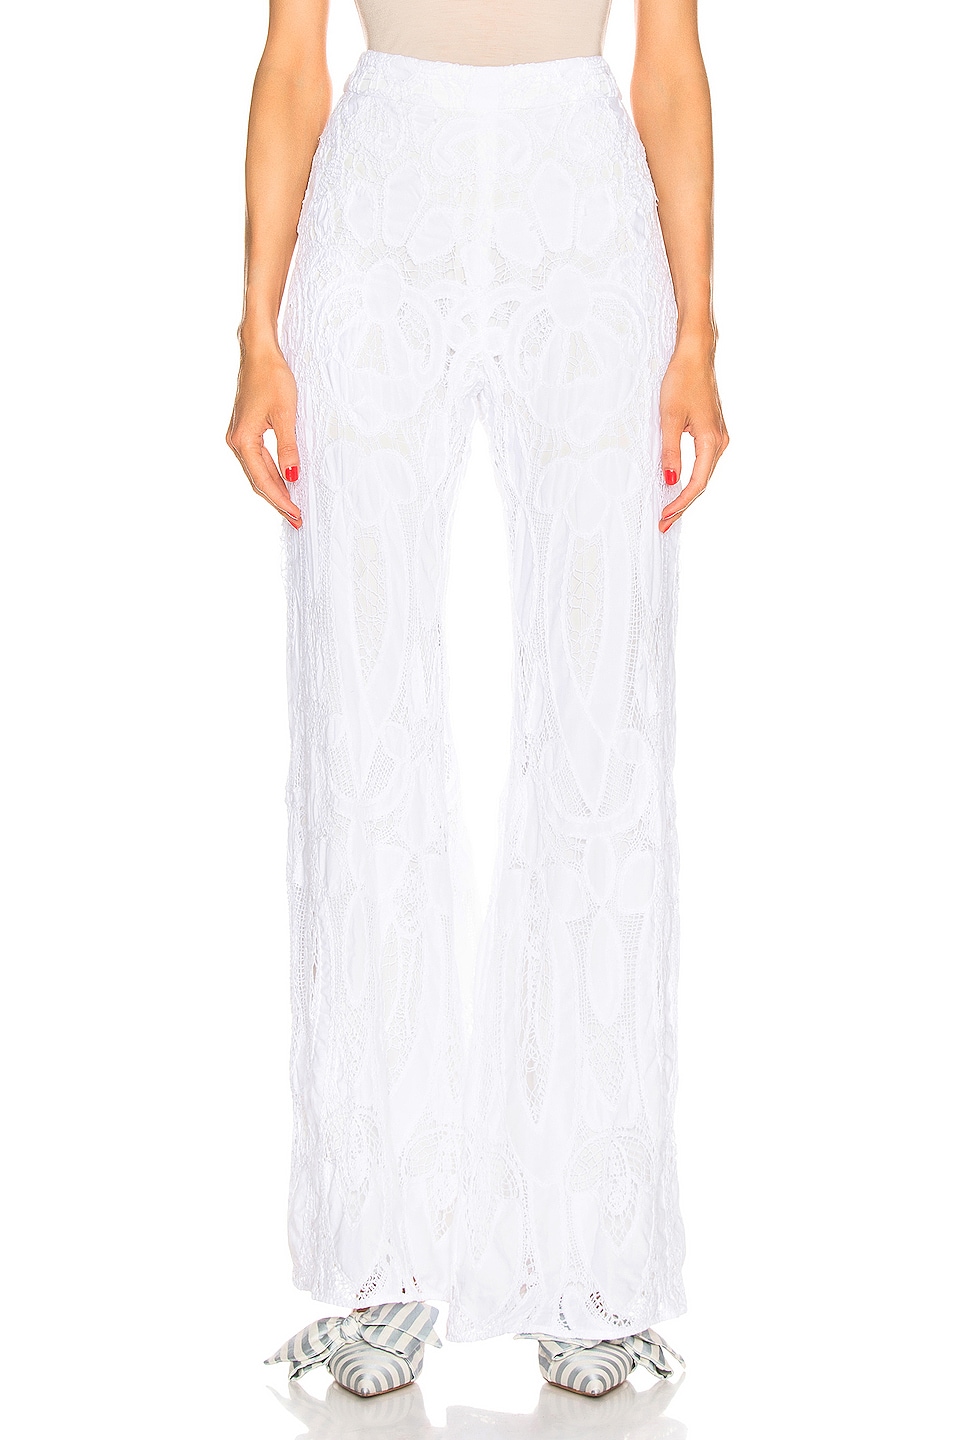 ALEXIS ALEXIS RITCHIE PANT IN WHITE,ALXF-WP41